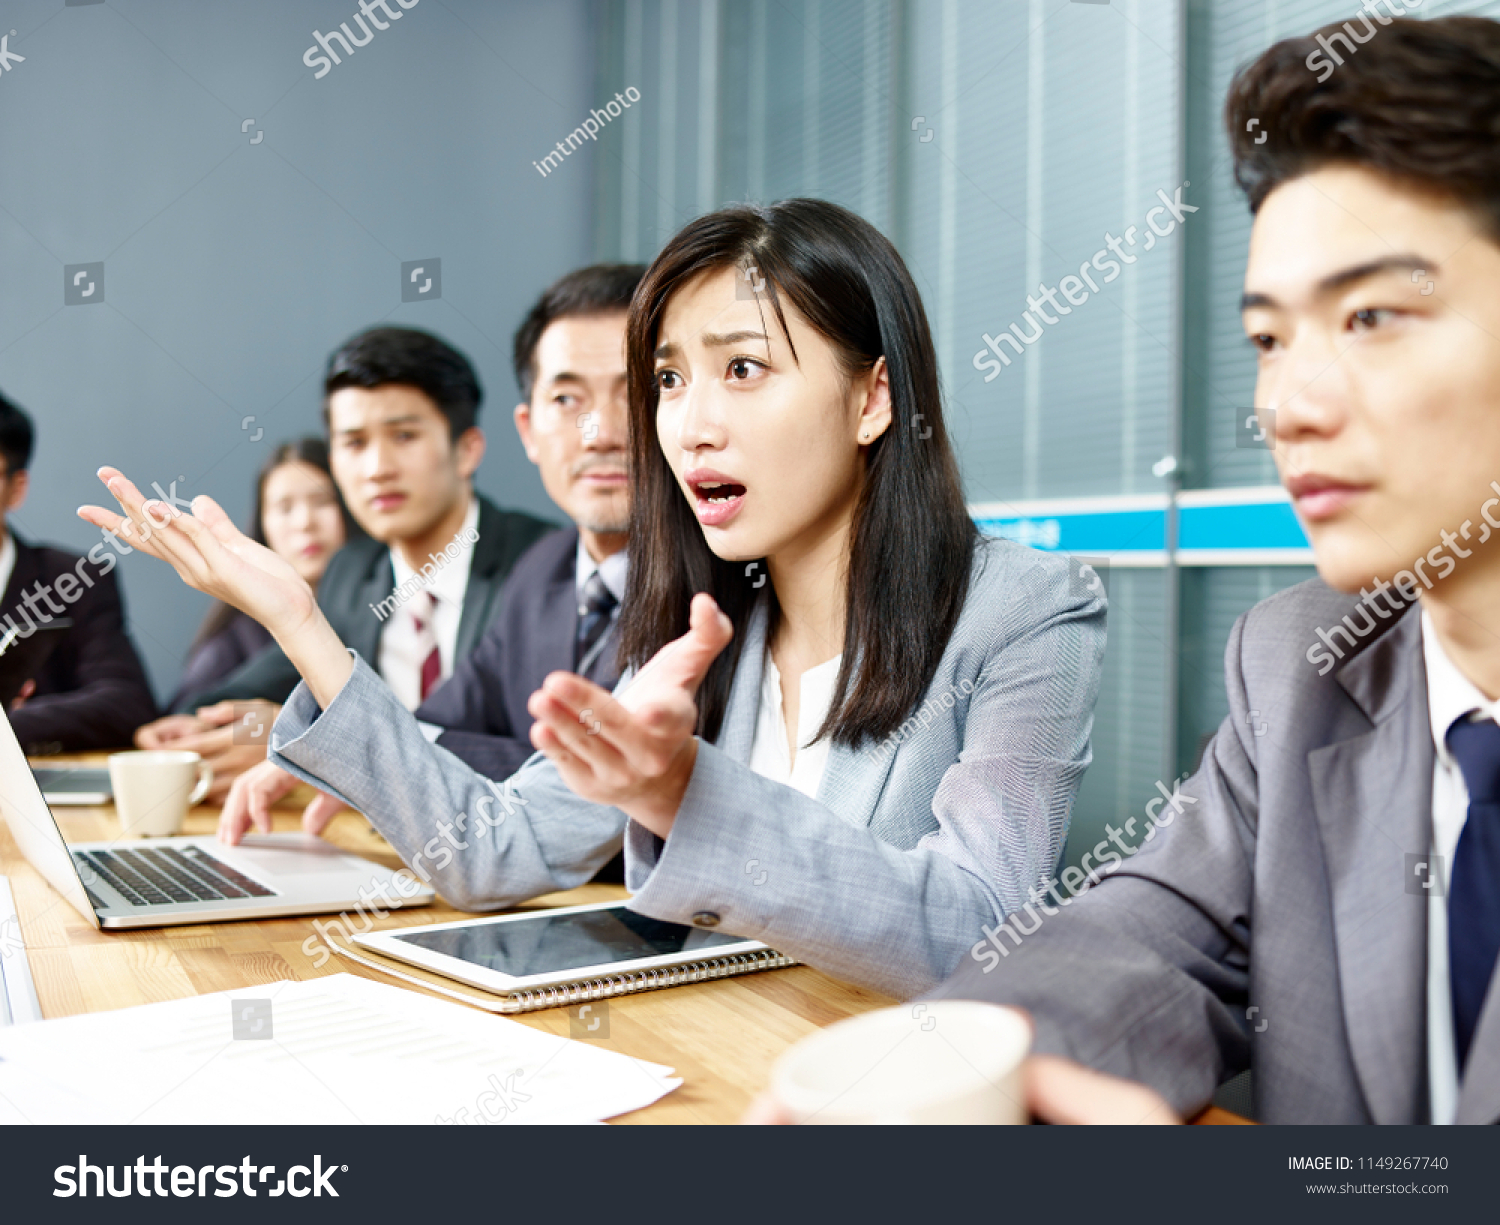 young asian business woman executive engaging in a heated discussion during meeting. #1149267740